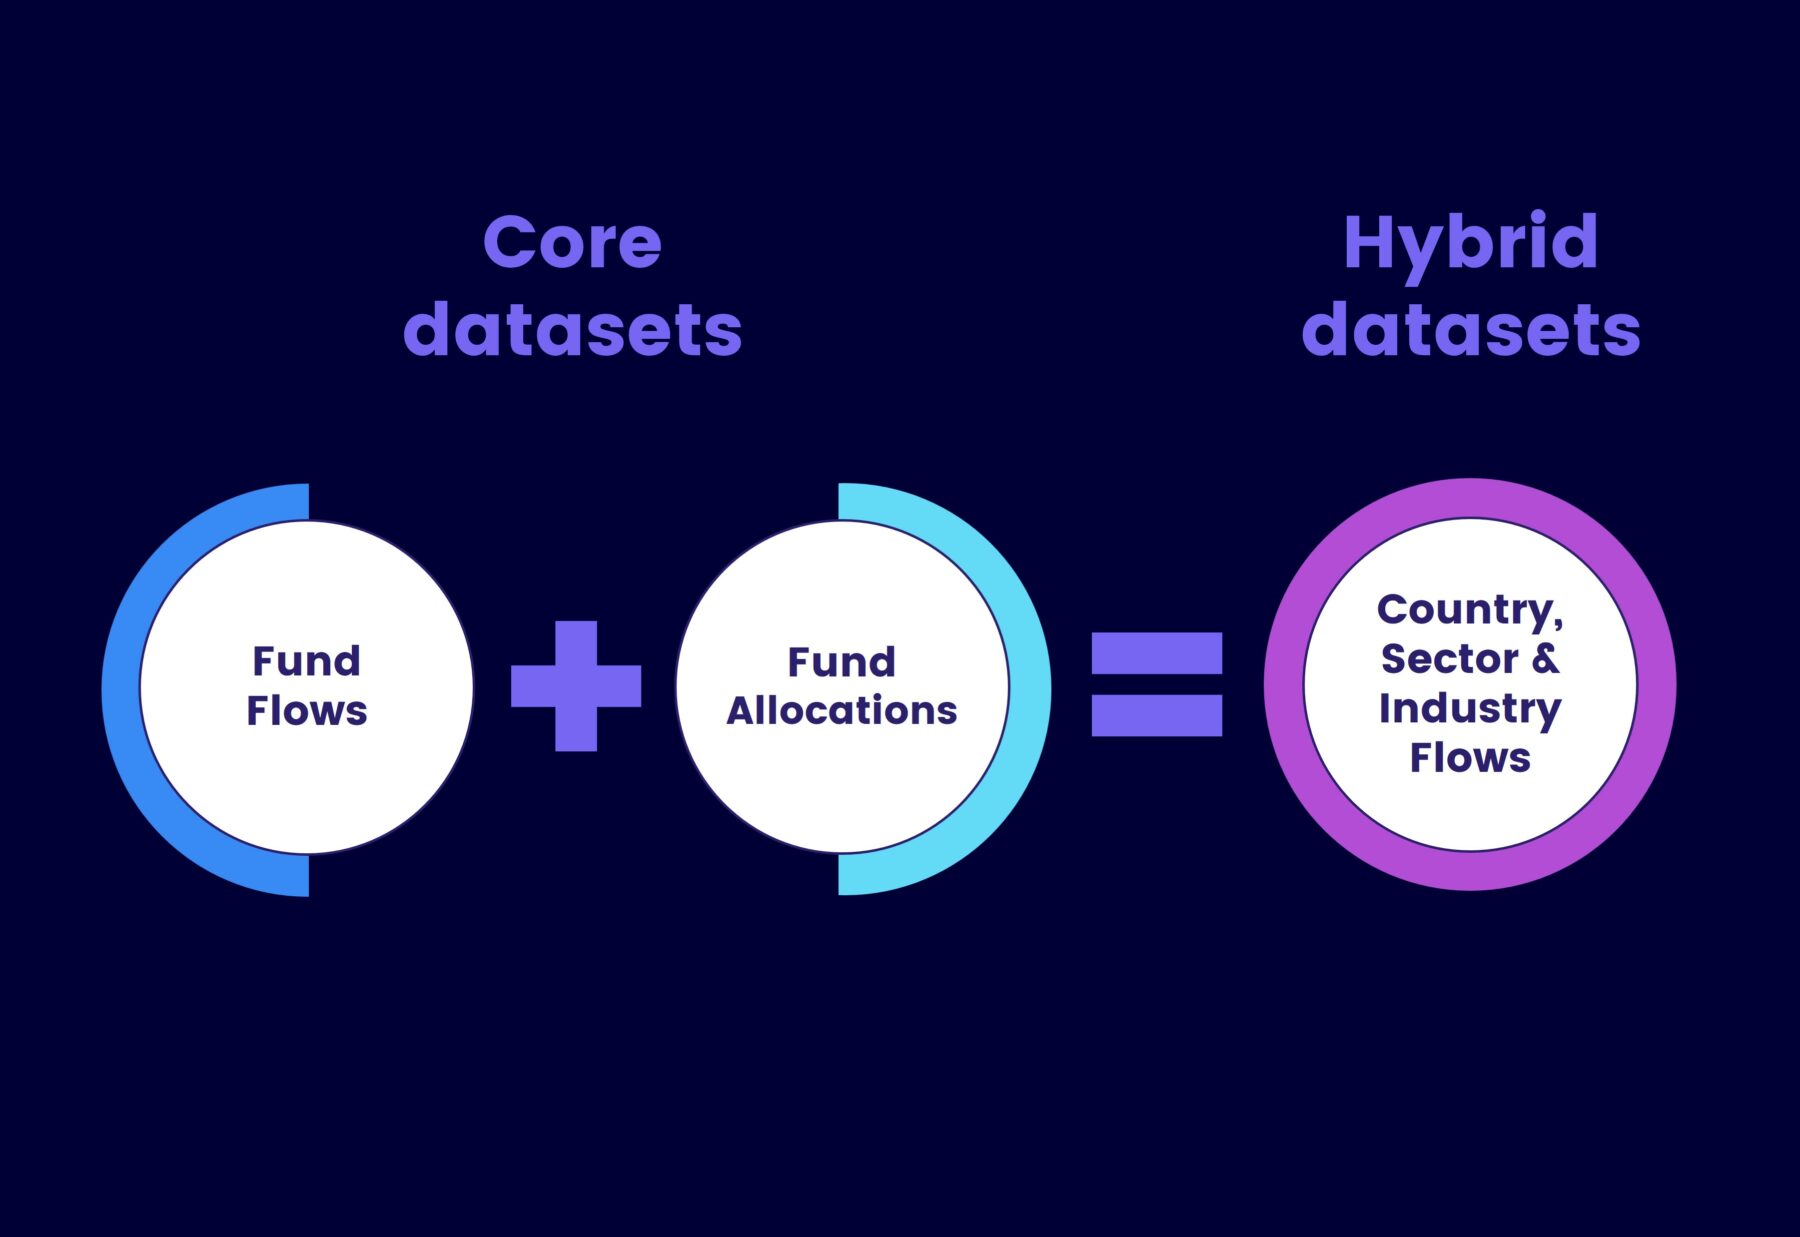 This image, in dark blue background, shows EPFR's Fund Flows and Fund Allocations core datasets, and how they combine to create our hybrid datasets.